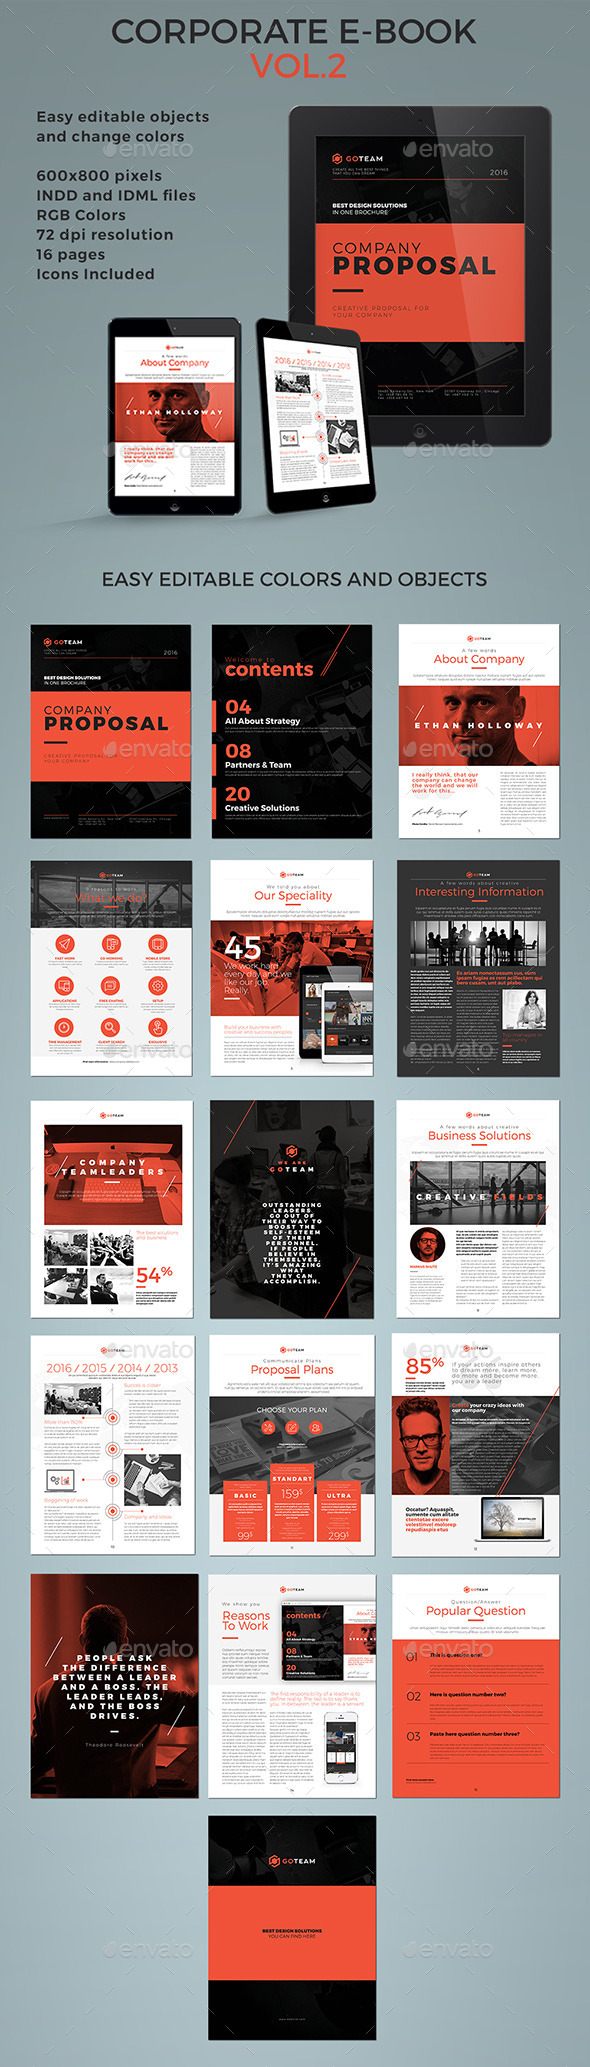 Graphics: Advertising Annual Report Business Clean Company Company Template Contents Corporate Design Digital Document Dribble E-book Ebook Electronic Elegant Epublishing Formatting Freelance Indesign Informational Ipad Layout Marketing Minimalist Modern Portfolio Proposal Studio Typography